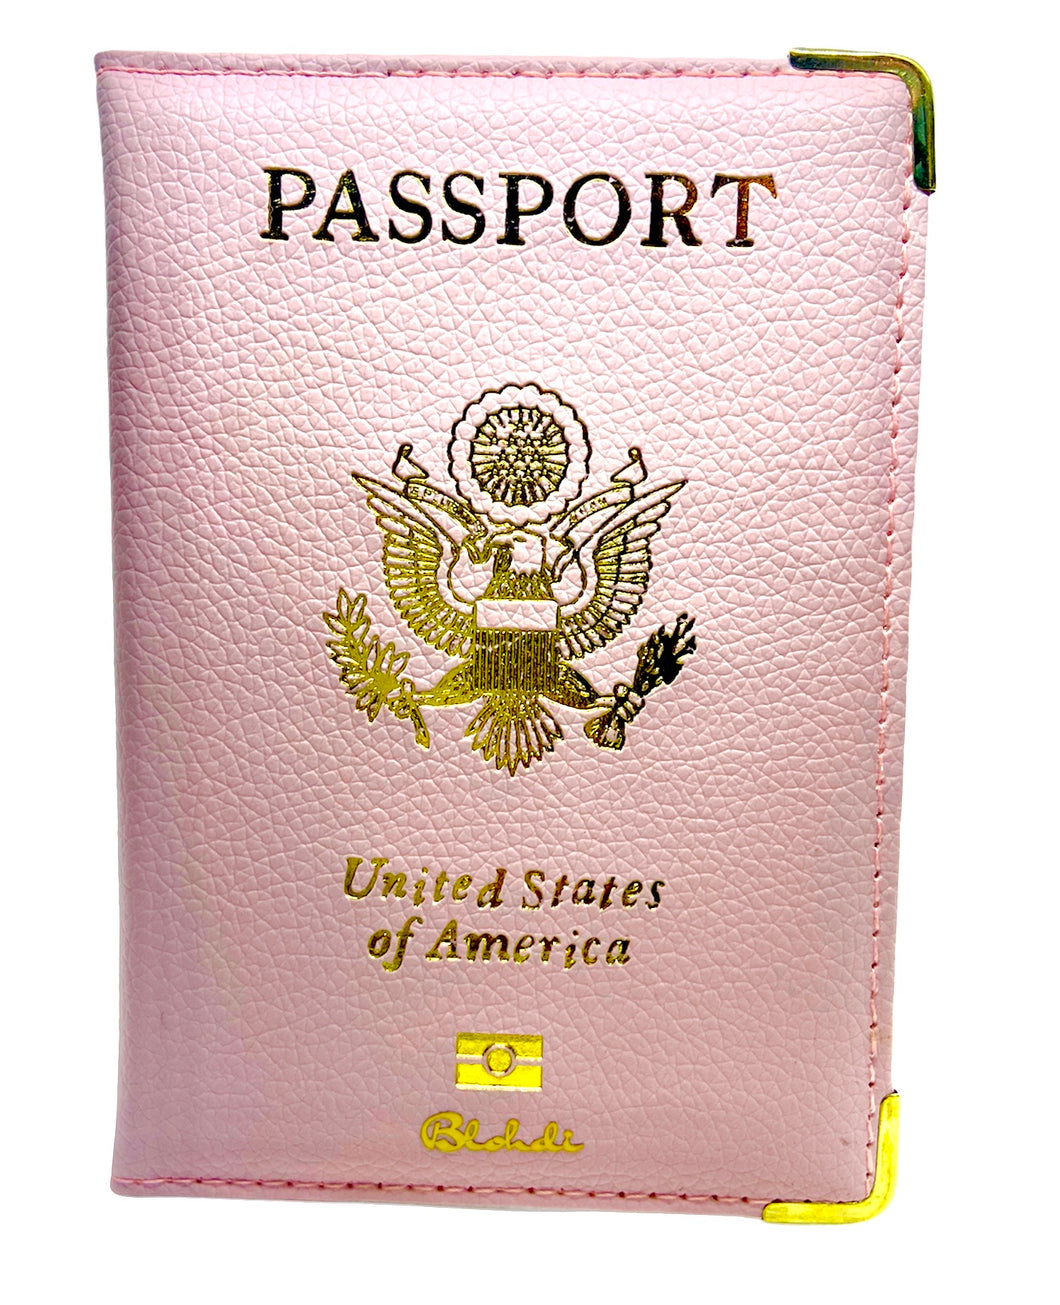 Passport Cover: Pink & Gold